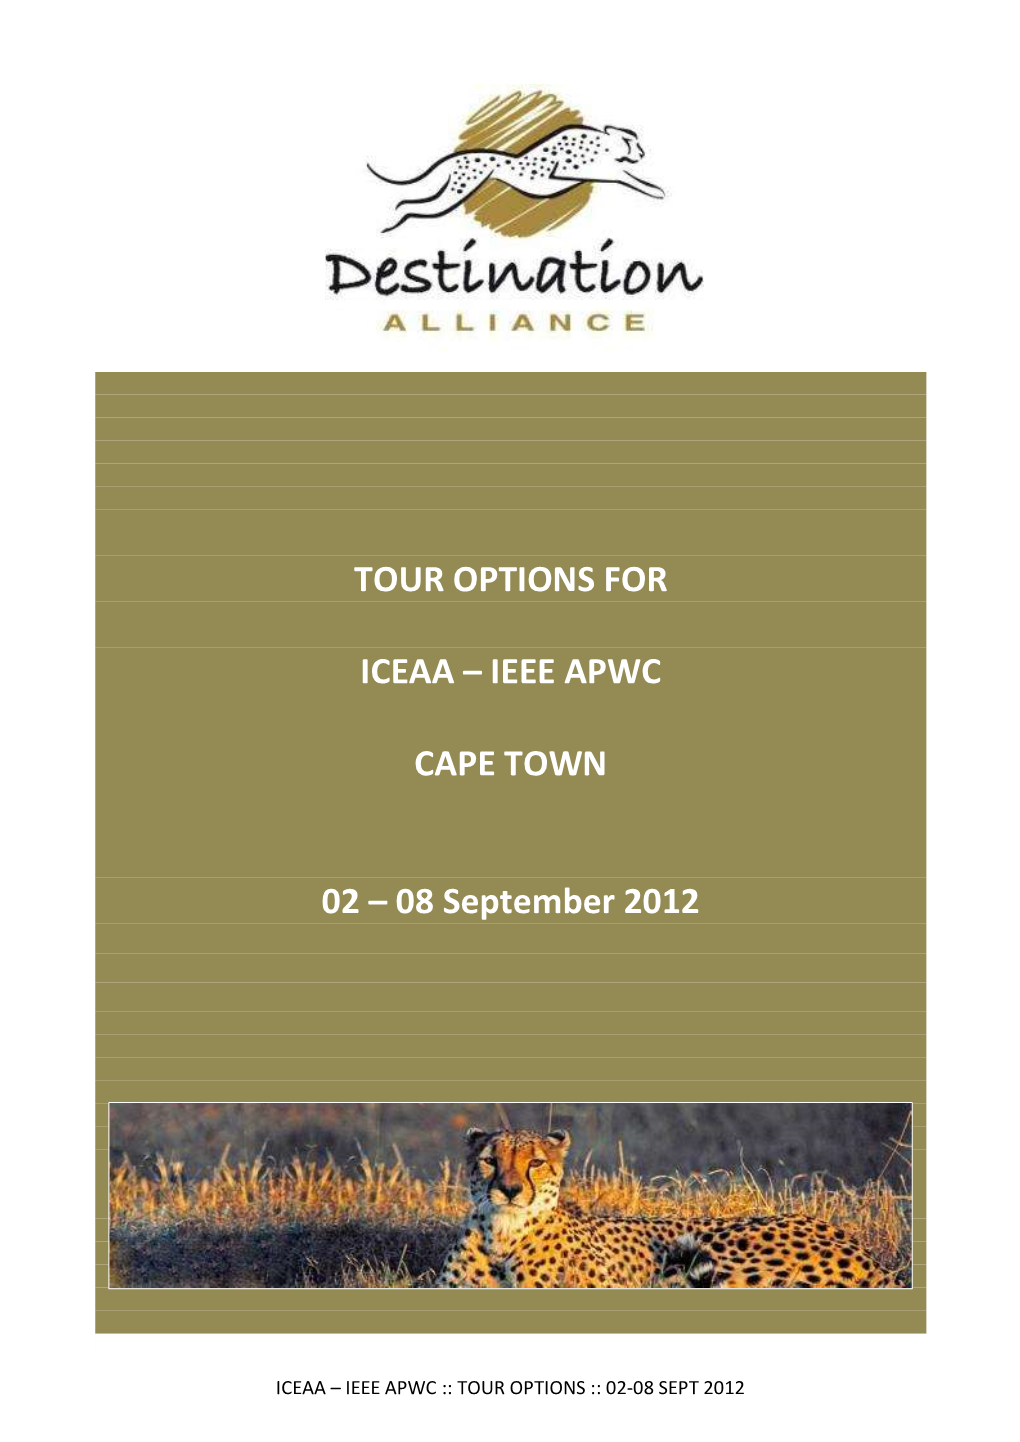 Tour Options for Iceaa – Ieee Apwc Cape Town 02 – 08